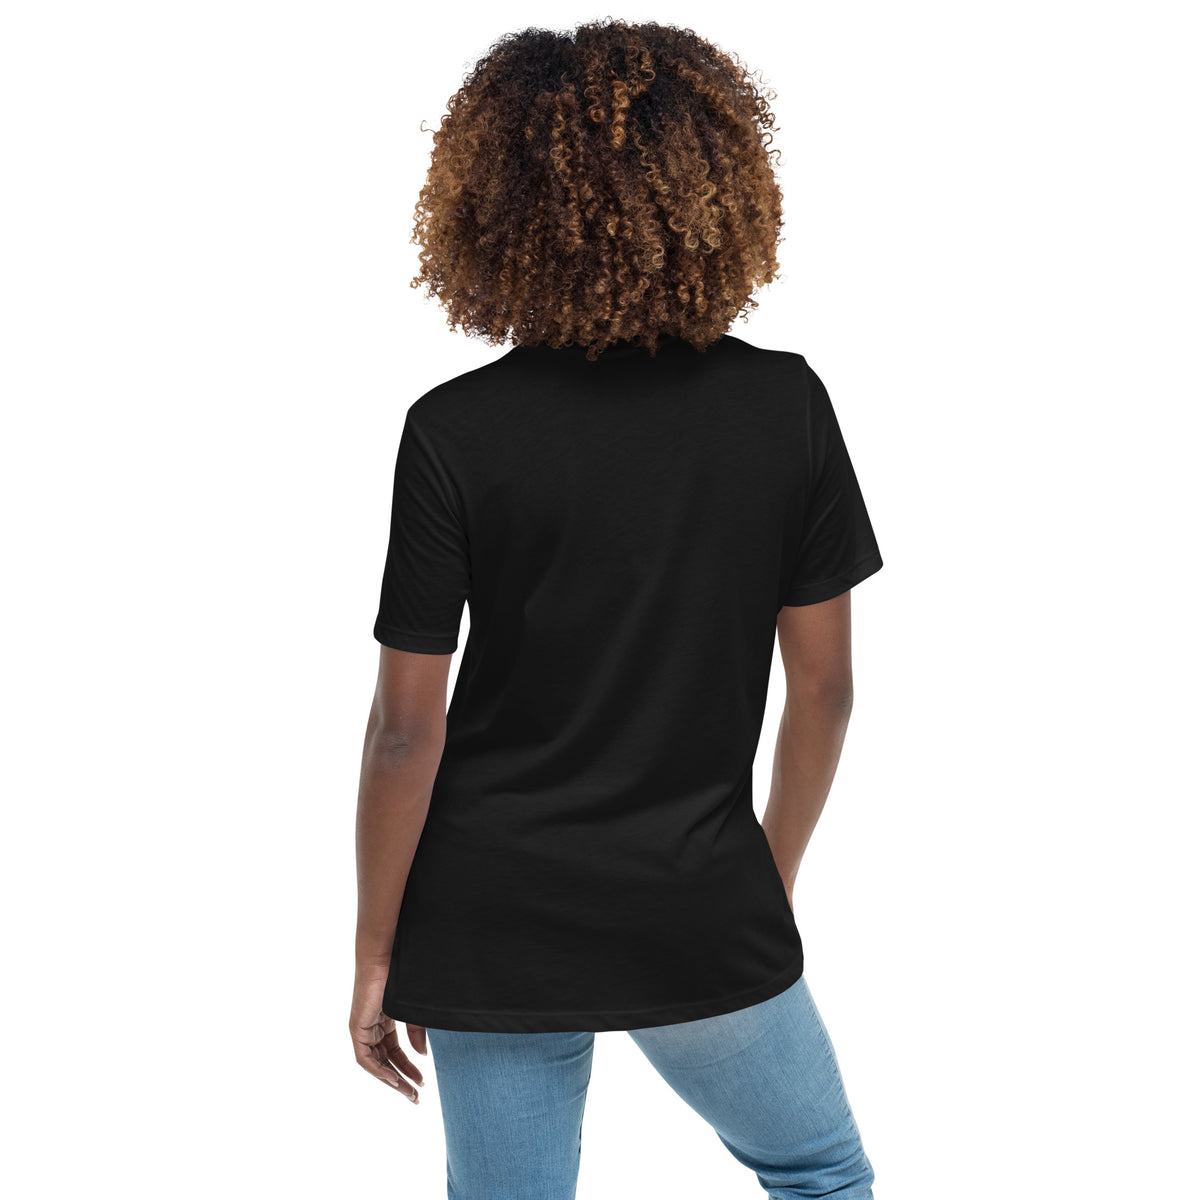 Lilith Women&#39;s Relaxed T-Shirt